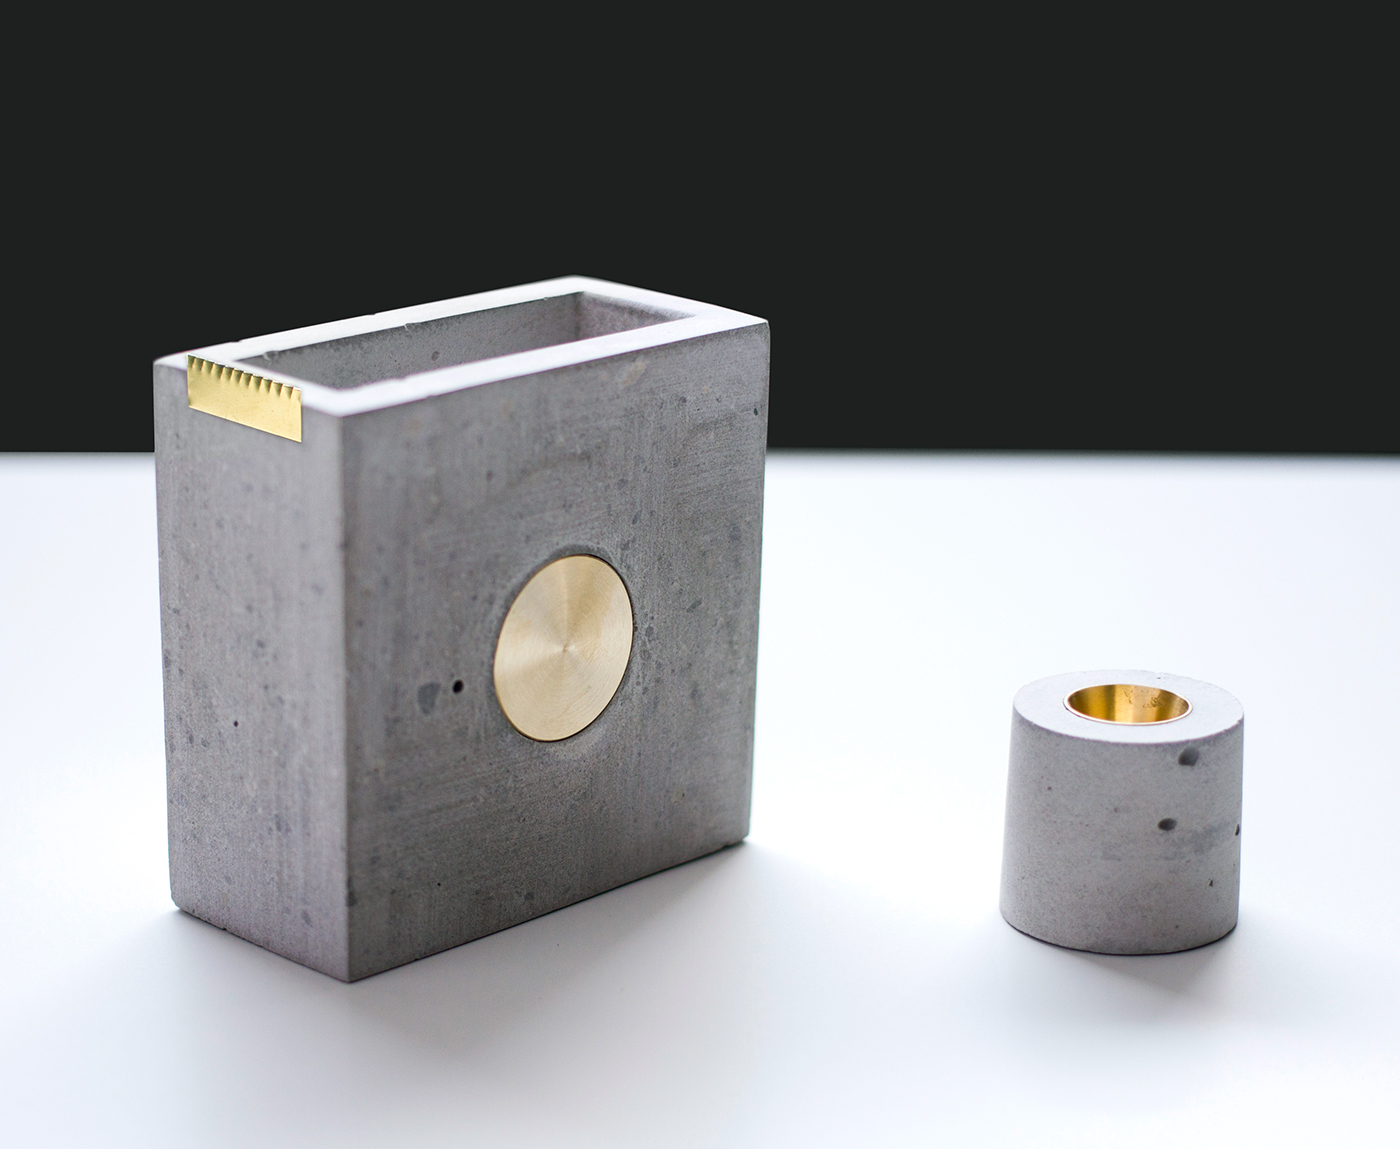 concrete brass Stationery minimal functional workspace organisation design curated modern